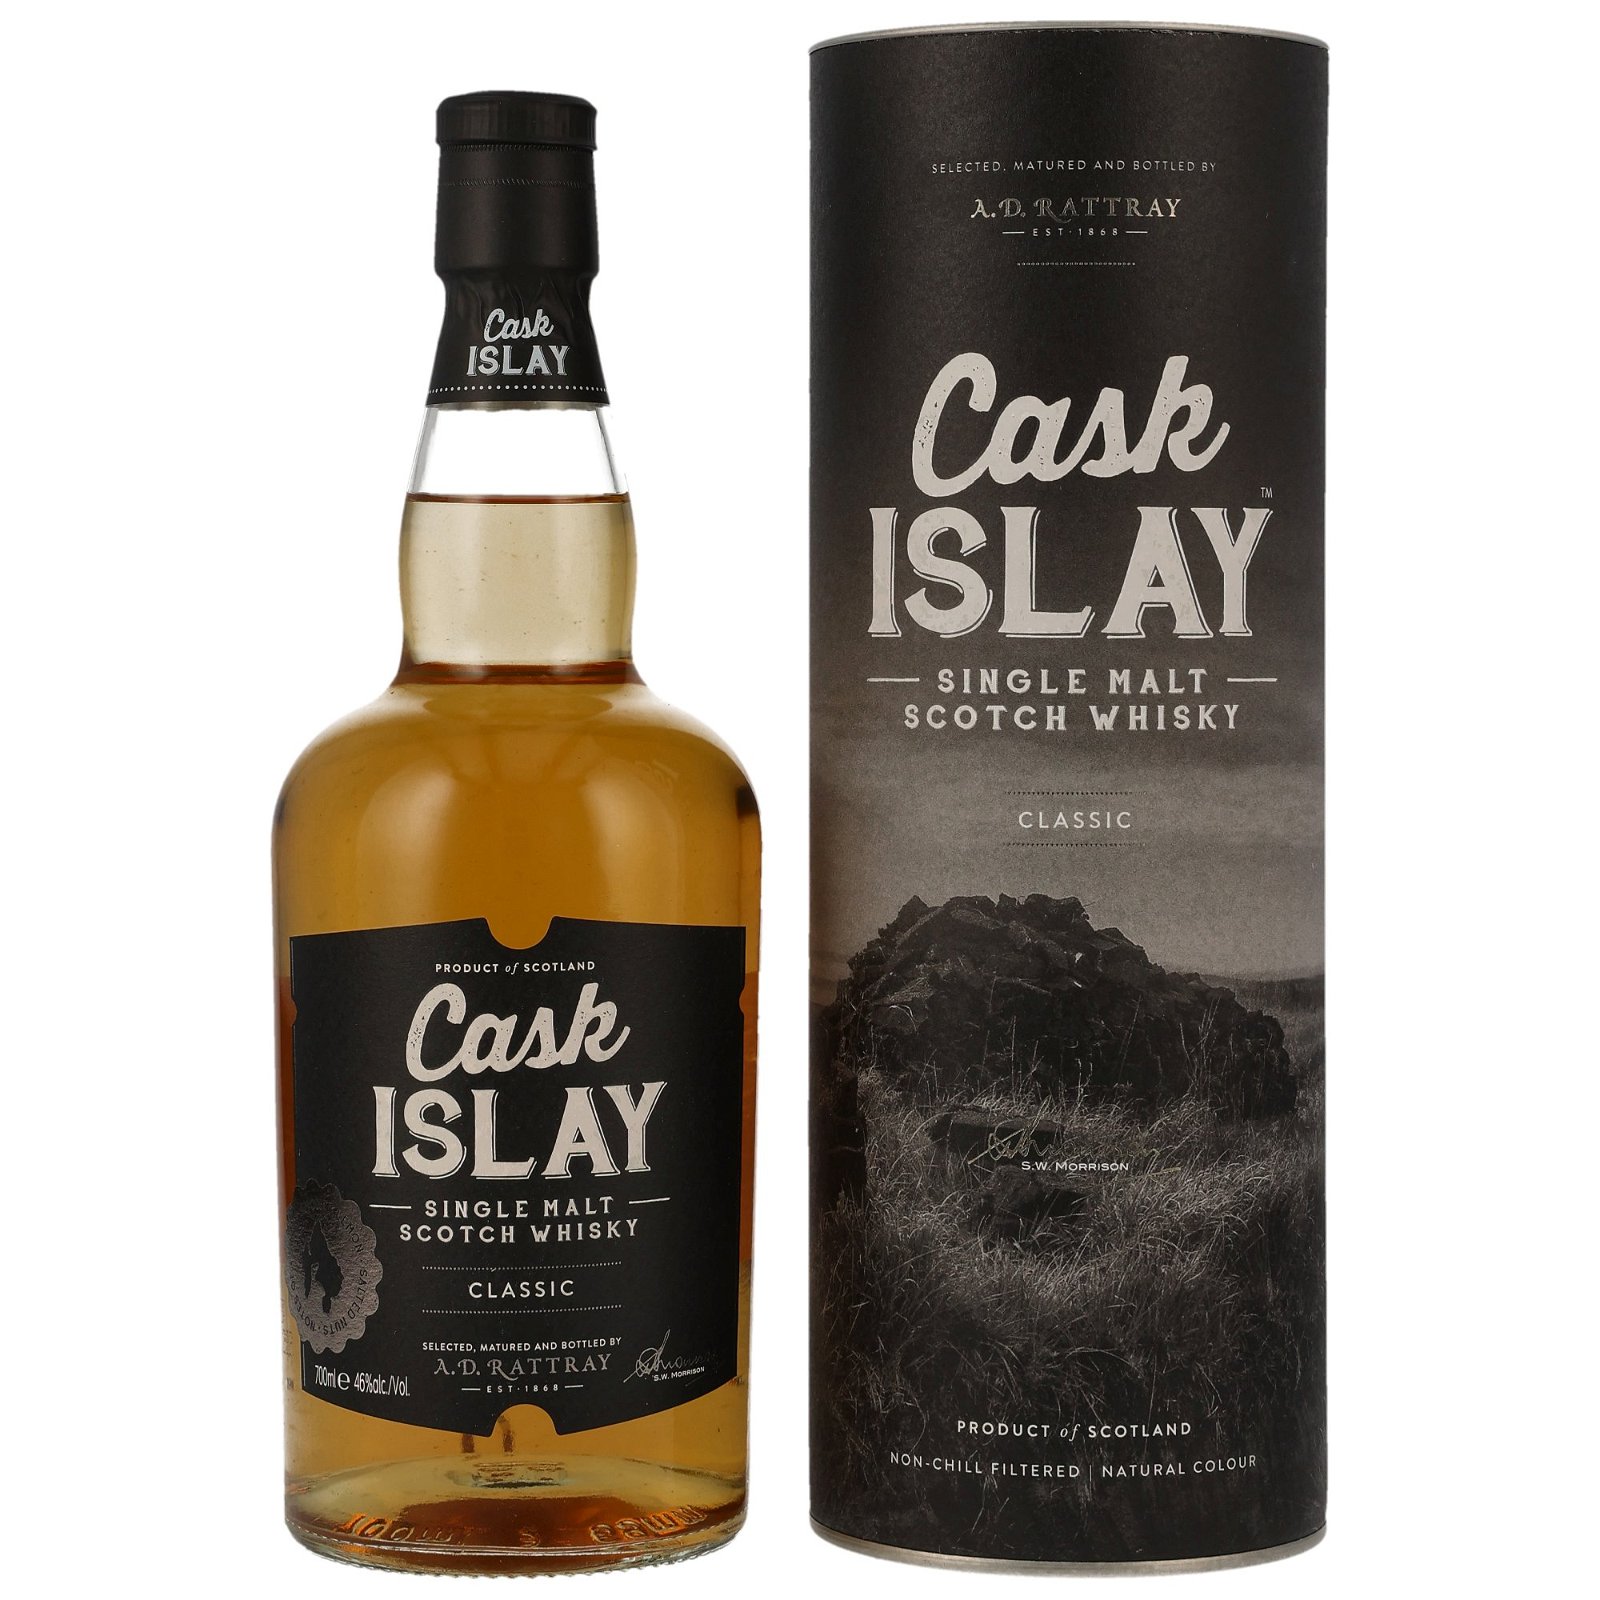 Cask Islay Classic (A.D. Rattray)